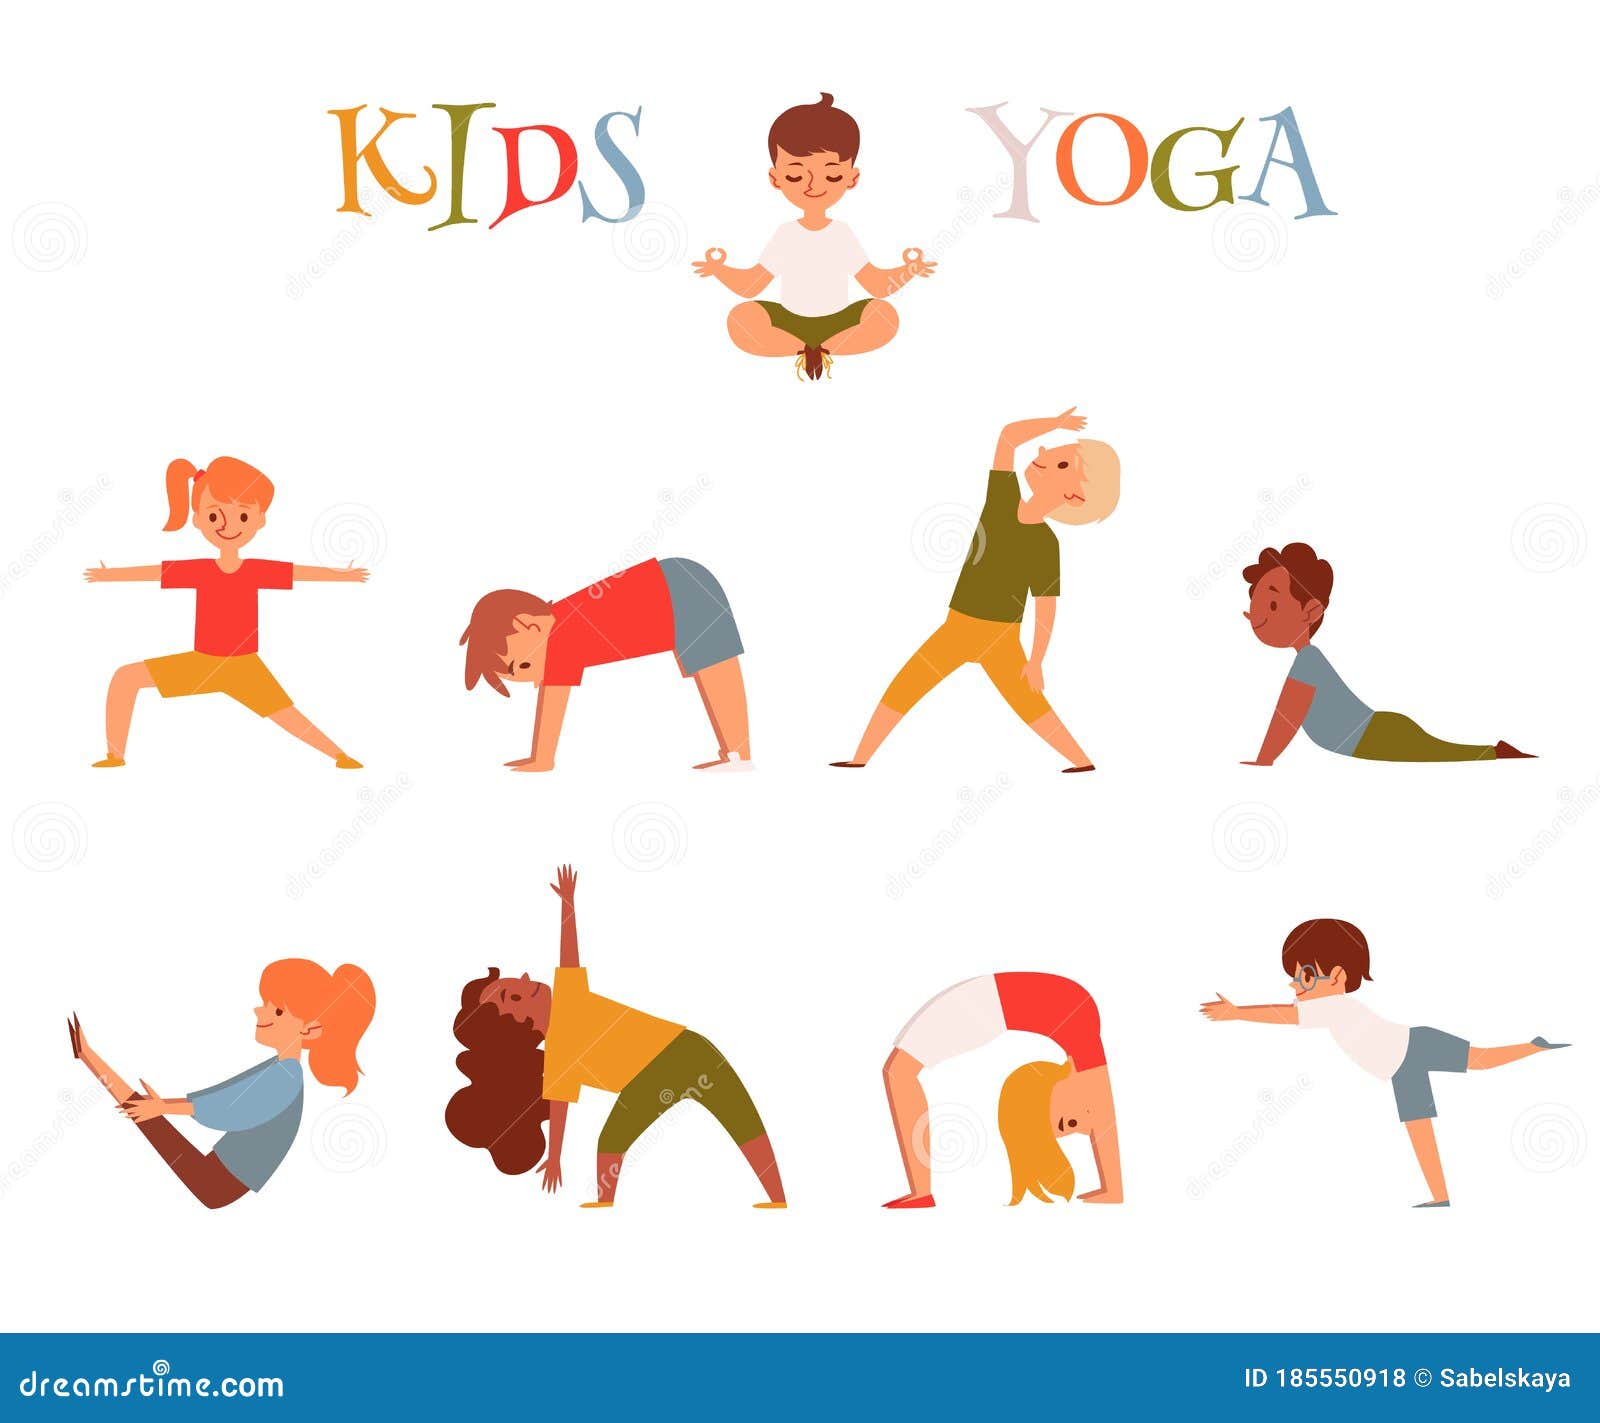 The Ultimate List of Free Yoga Pose Printables for Kids {Mindfulness  Resources} - Bits of Positivity